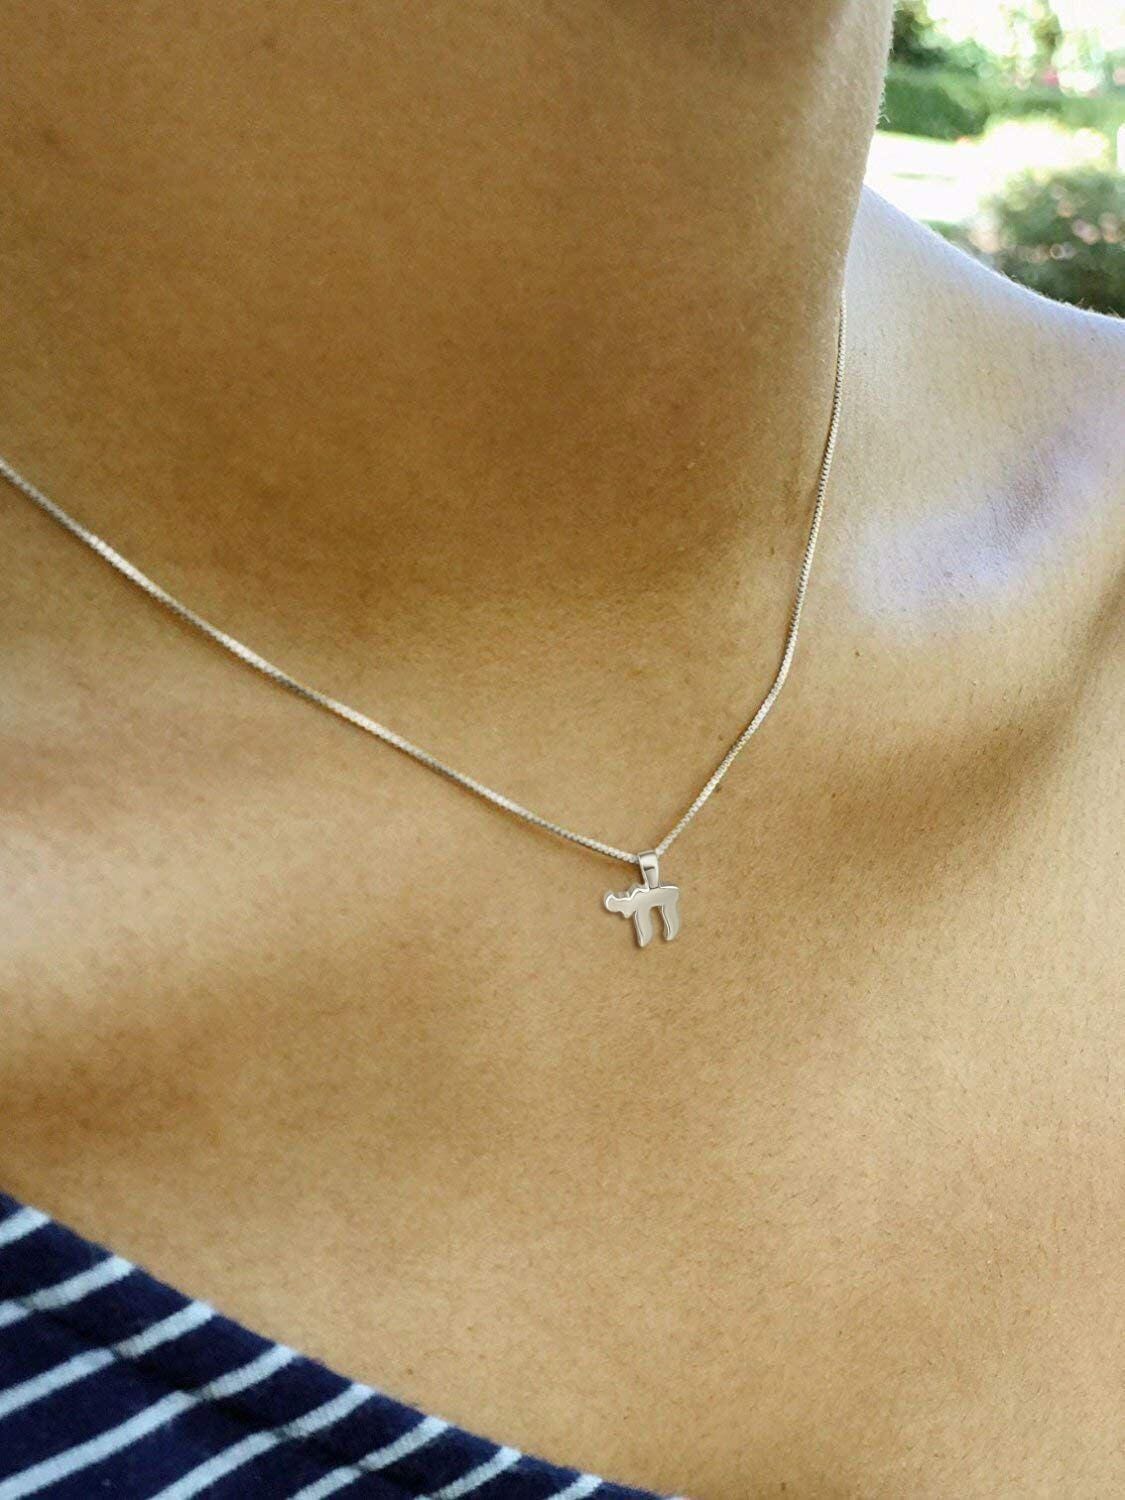 Alef Bet Necklaces Sterling Silver Tiny Chai Necklace - Sterling Silver